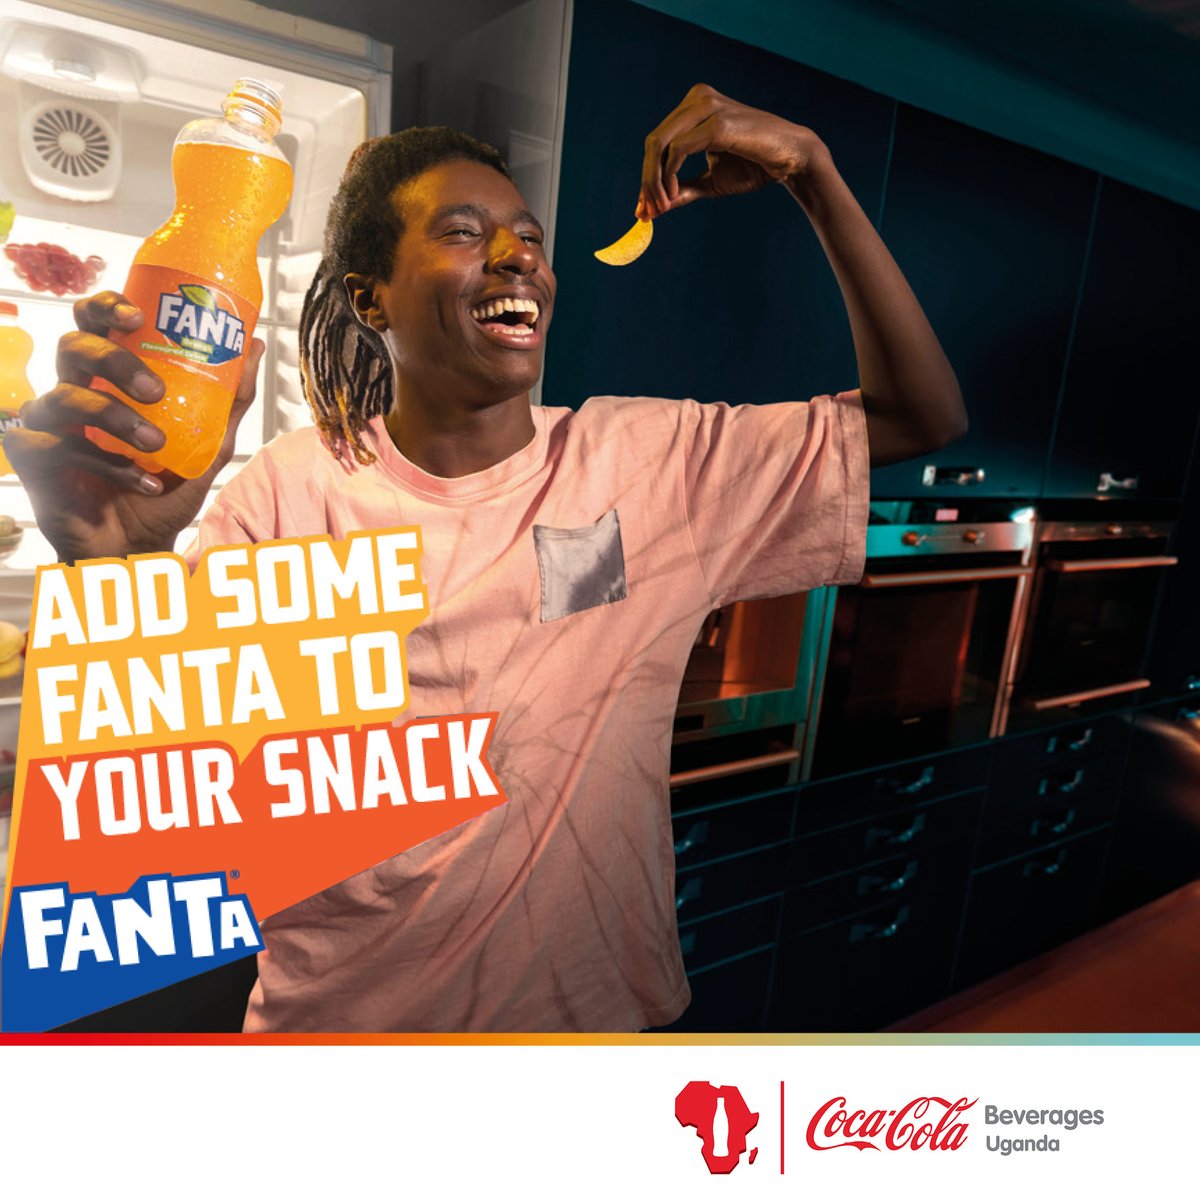 There is no snacking without a Fanta! What’s your favorite snack to pair with Fanta? #RefreshUG #CCBU